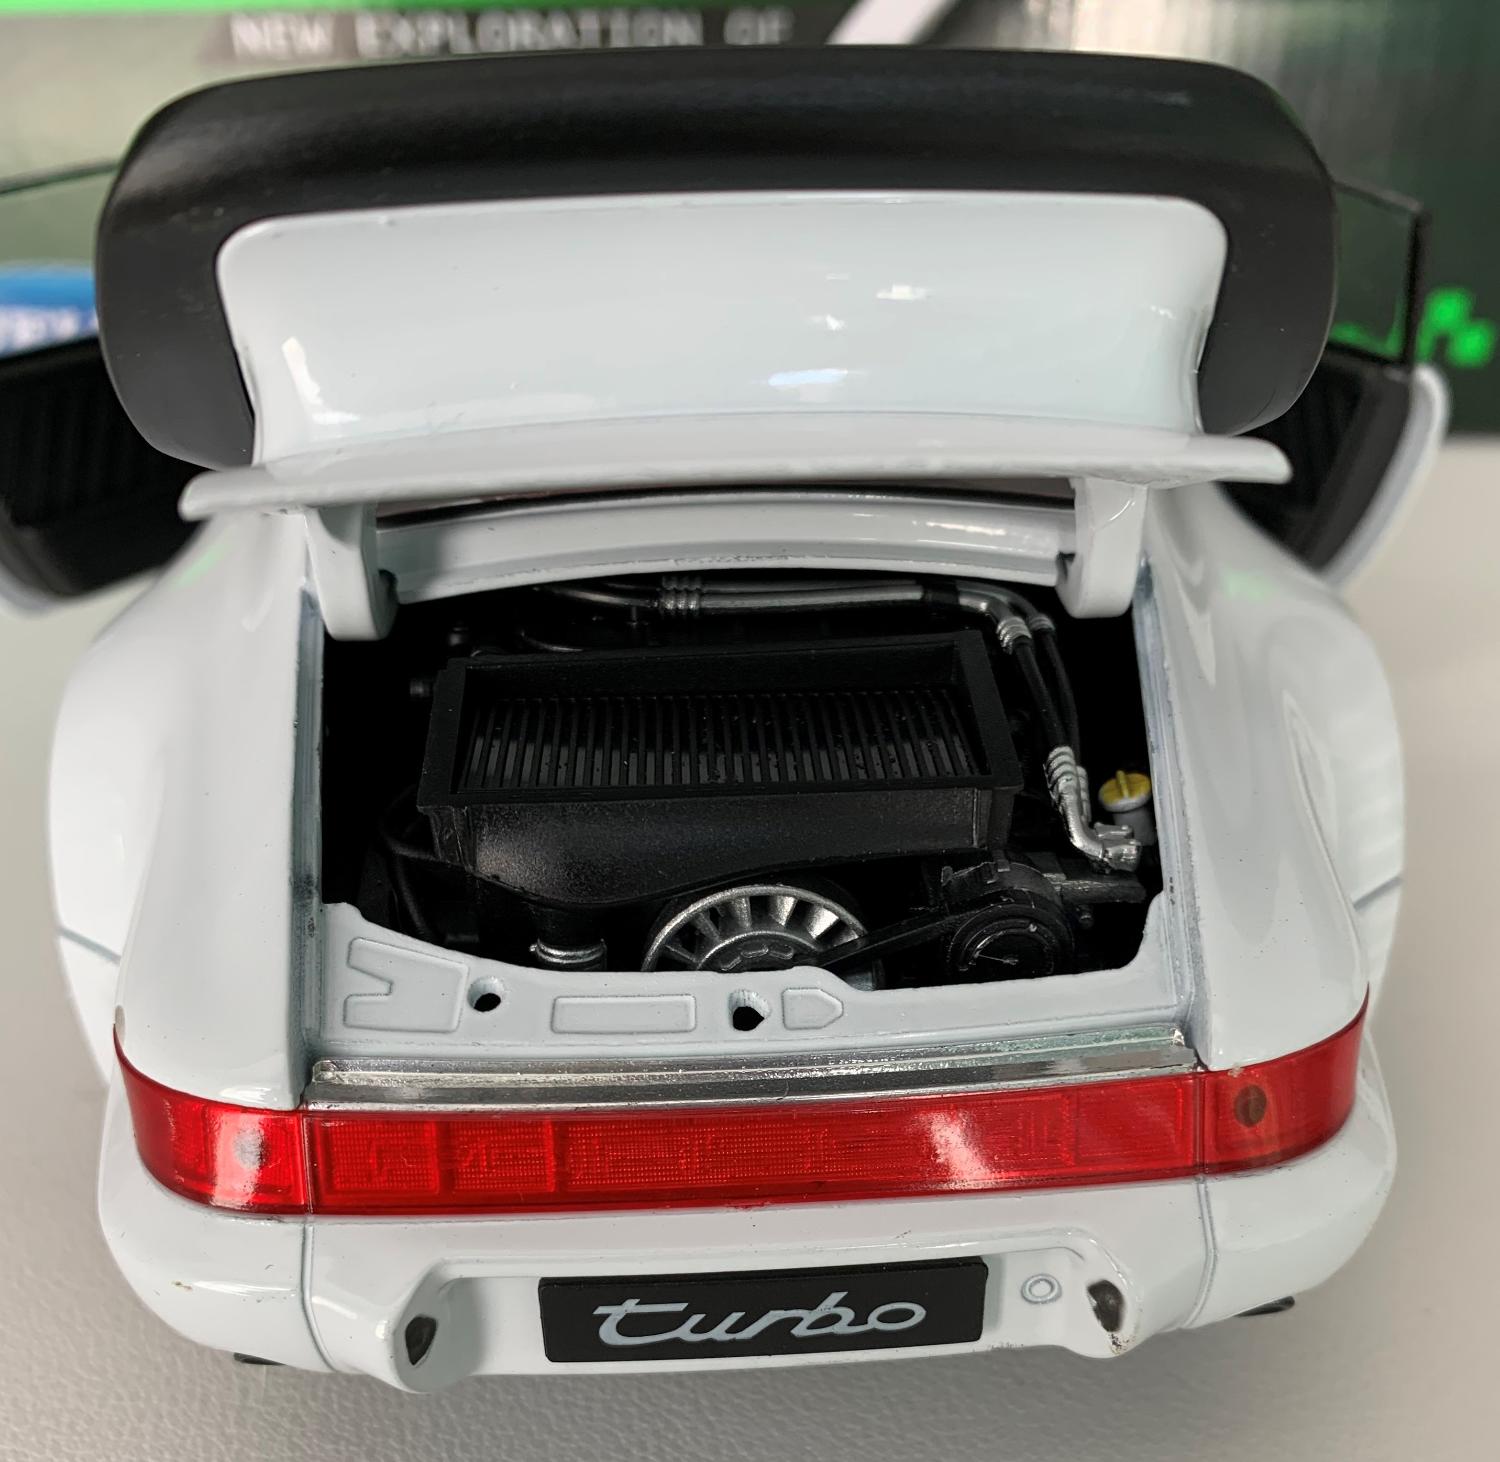 An excellent reproduction of the Porsche 911 (964) Turbo with high level of detail throughout, all authentically recreated